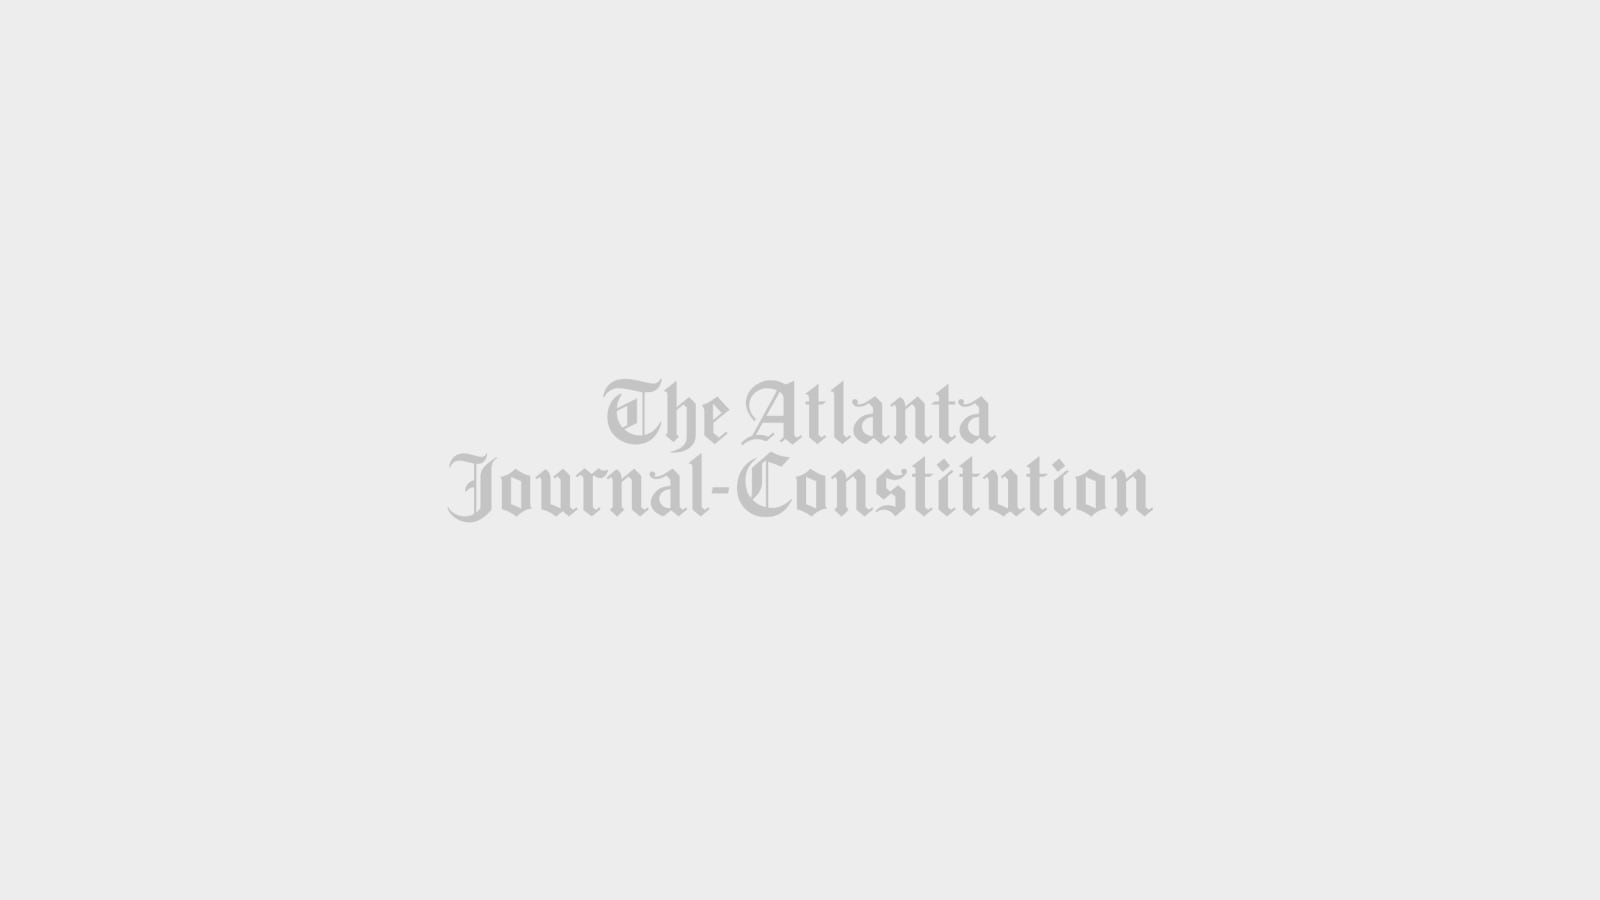 Georgia State University holds orientation for more than 150 incoming students on Wed., June 23, 2021. The school has more than 52,000 students, the largest enrollment of any college or university in Georgia.  (Jenni Girtman for The Atlanta Journal-Constitution)